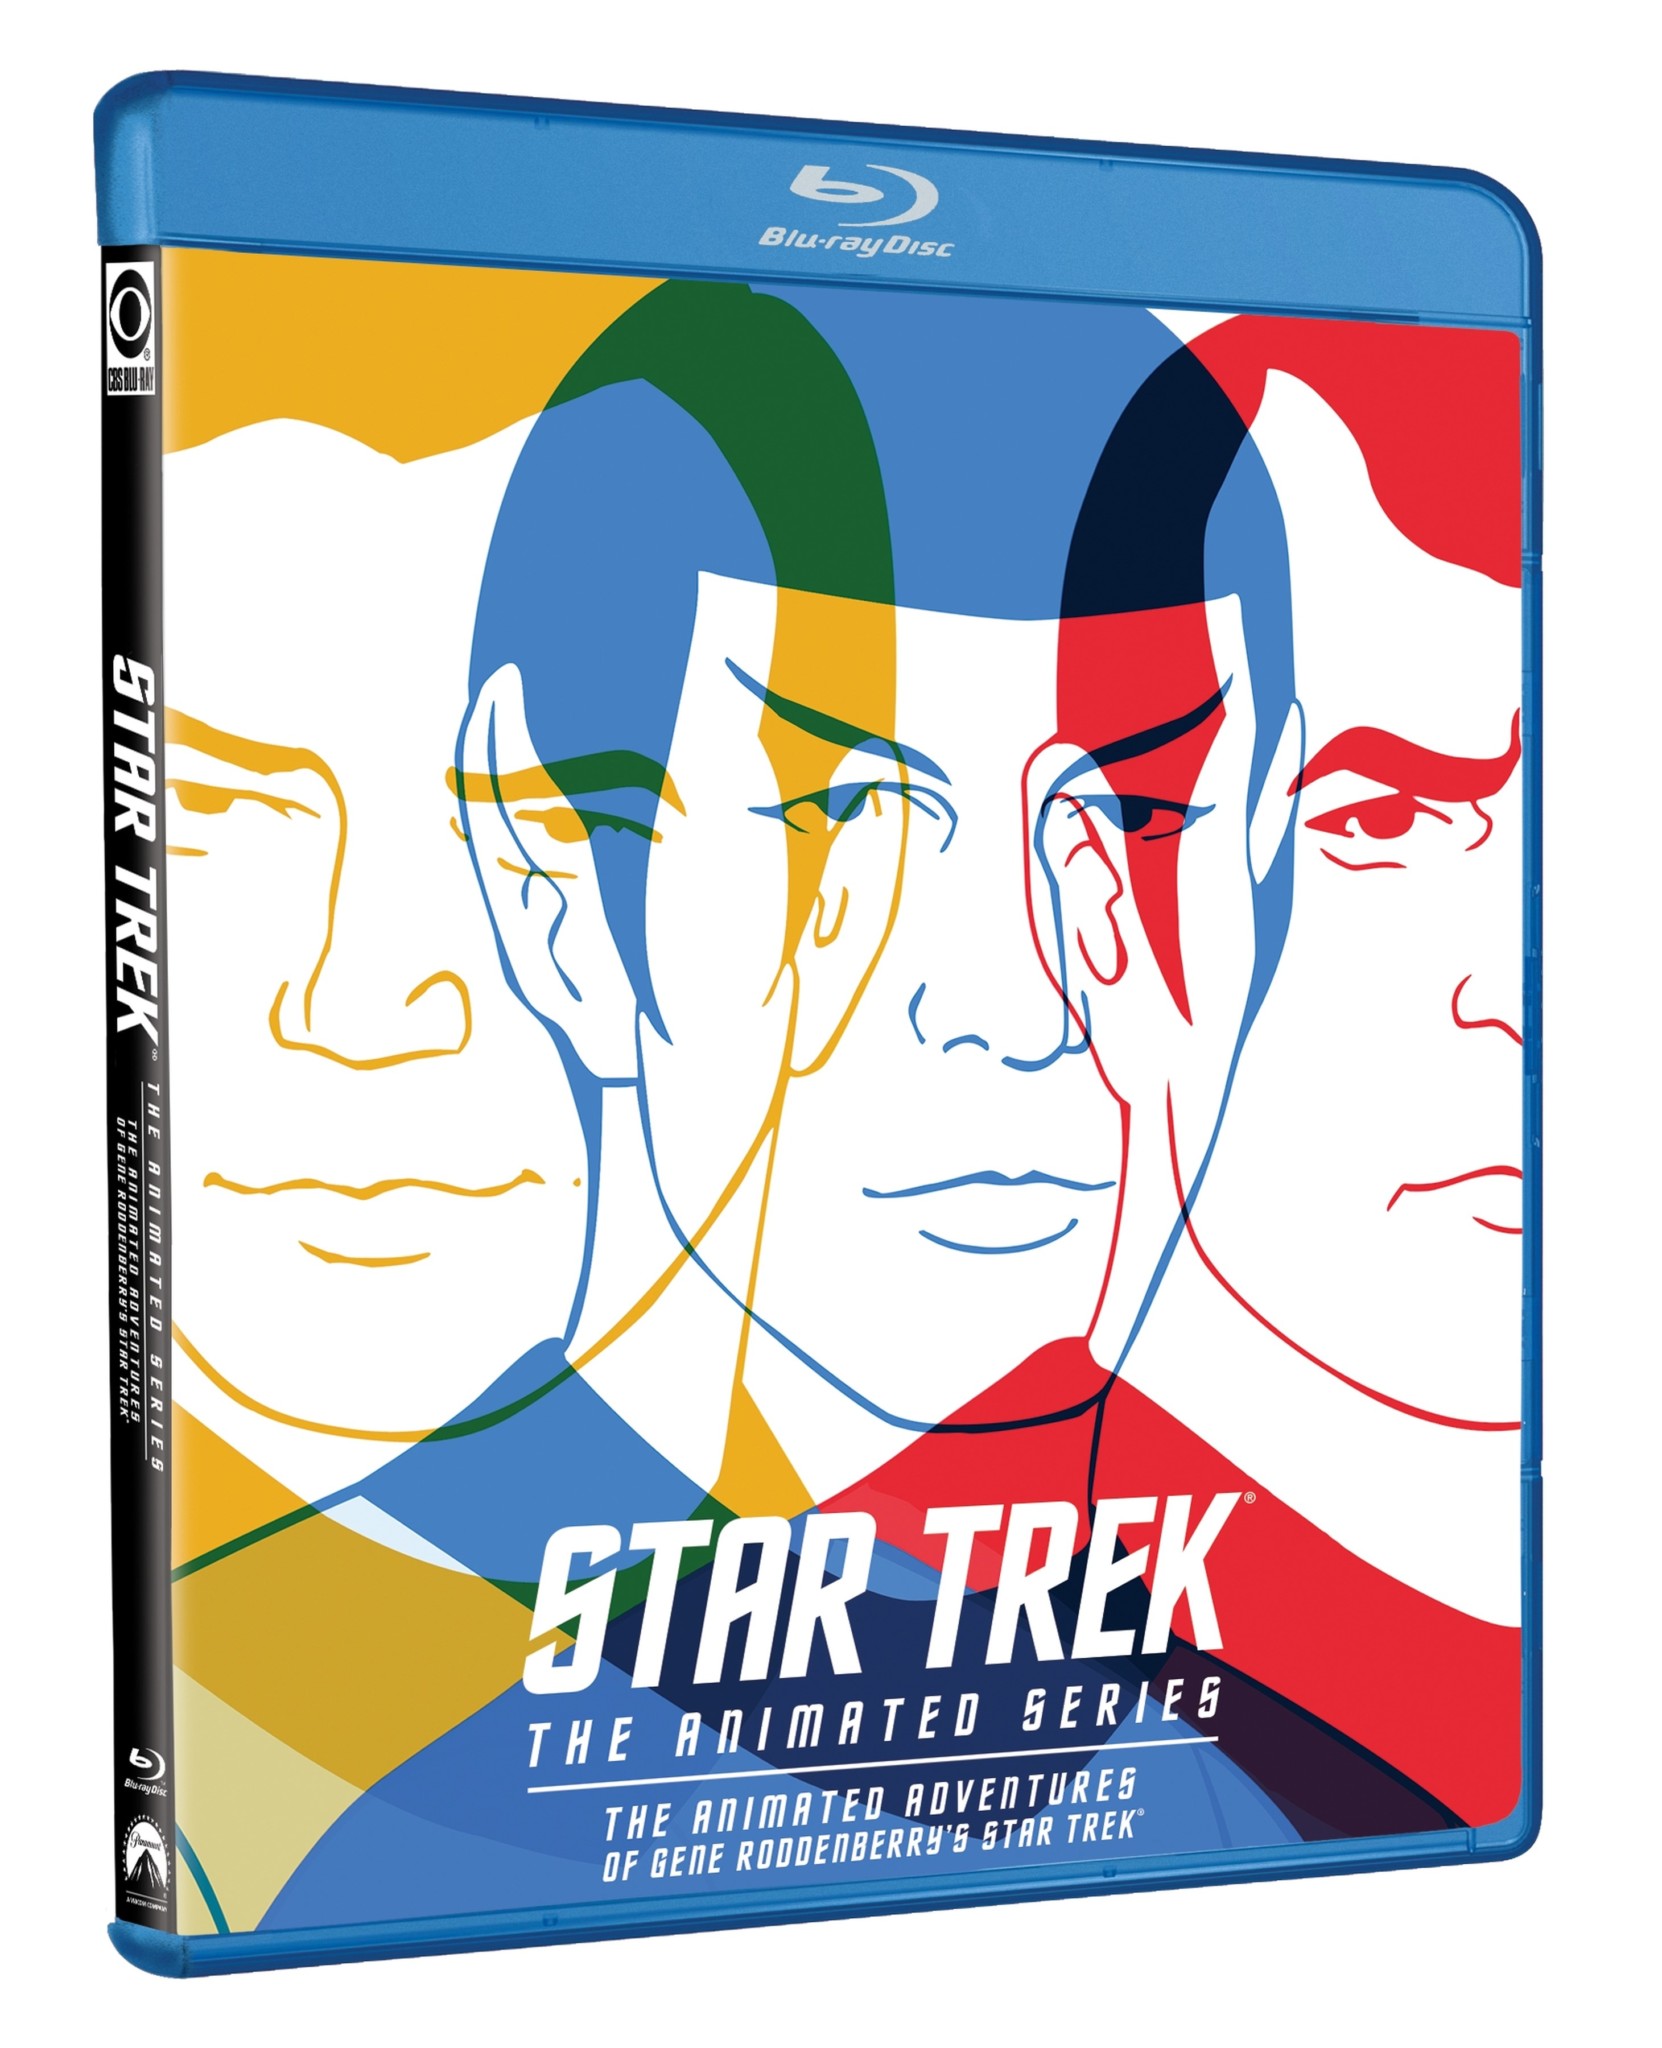 Star Trek: The Animated Series Blu-ray box art. Courtesy of CBS Home Entertainment and Paramount Home Media Distribution